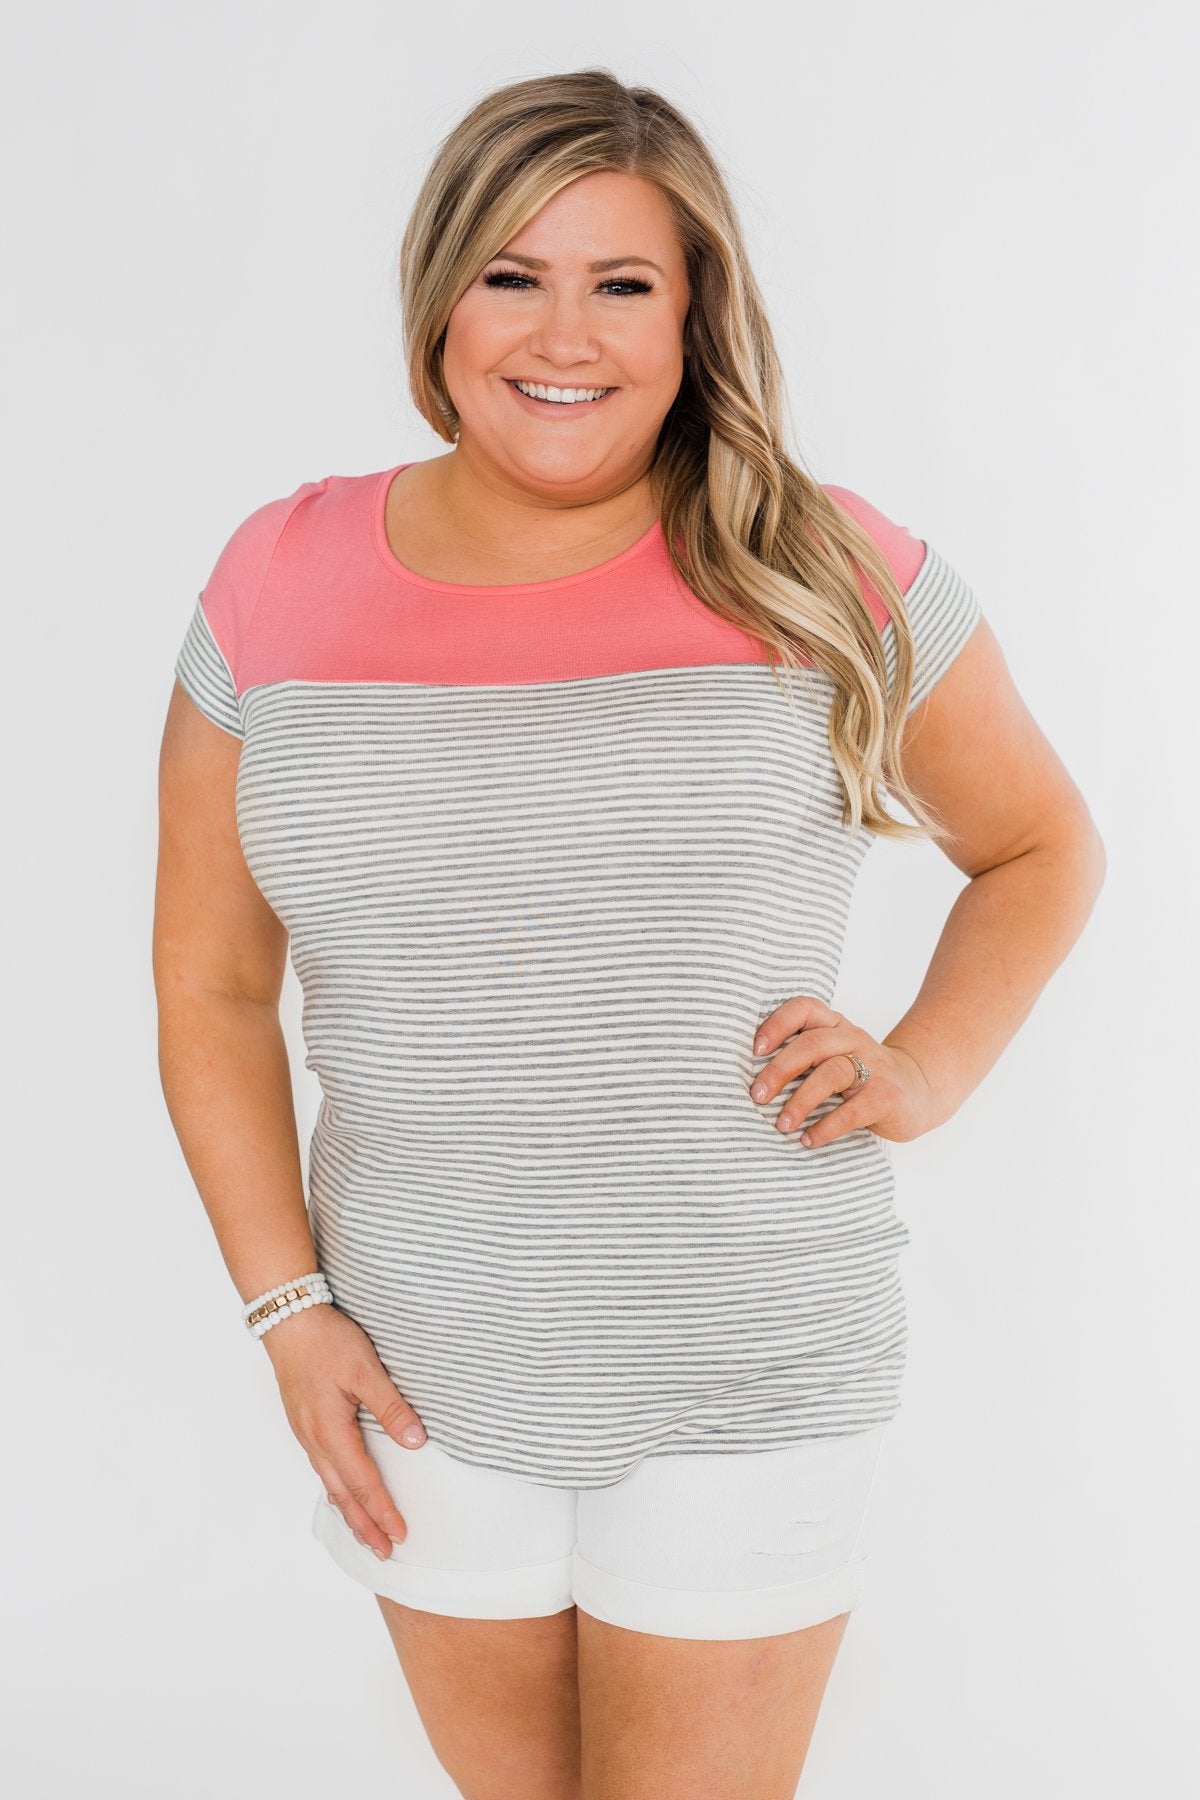 Spring Fever Short Sleeve Striped Top- Watermelon